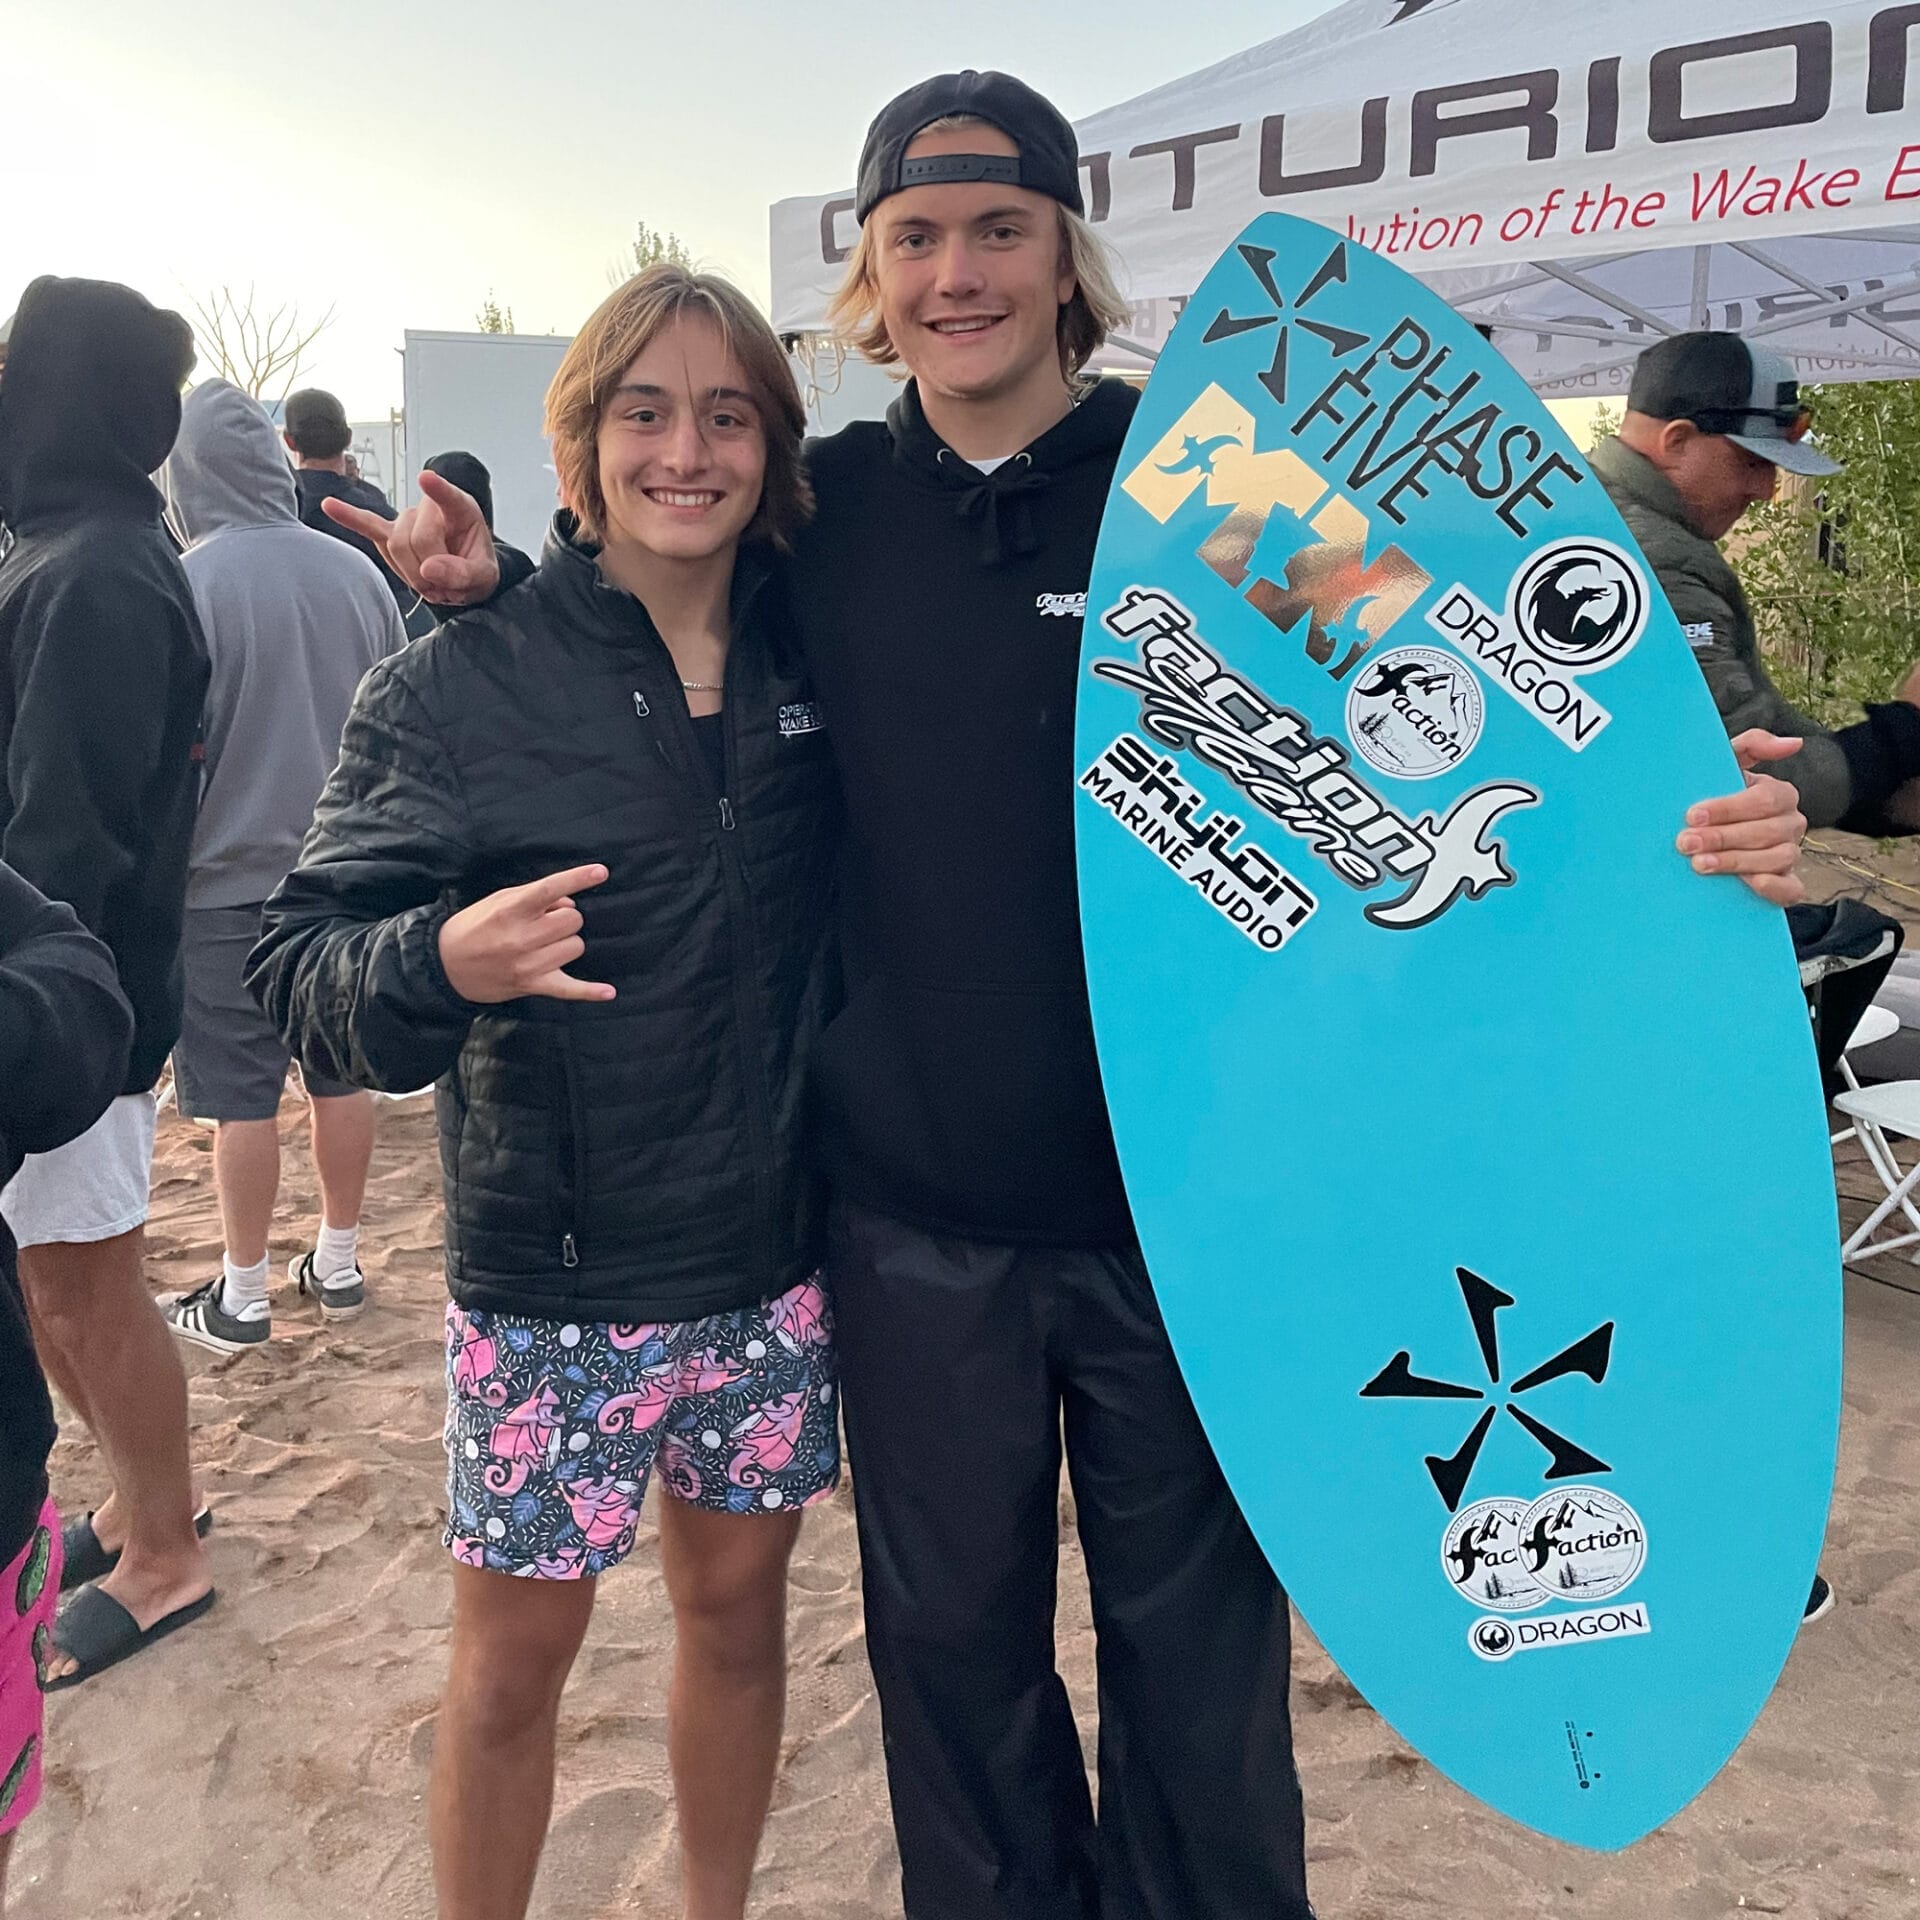 Cade Lybeck posing for a photo with a surfboard.